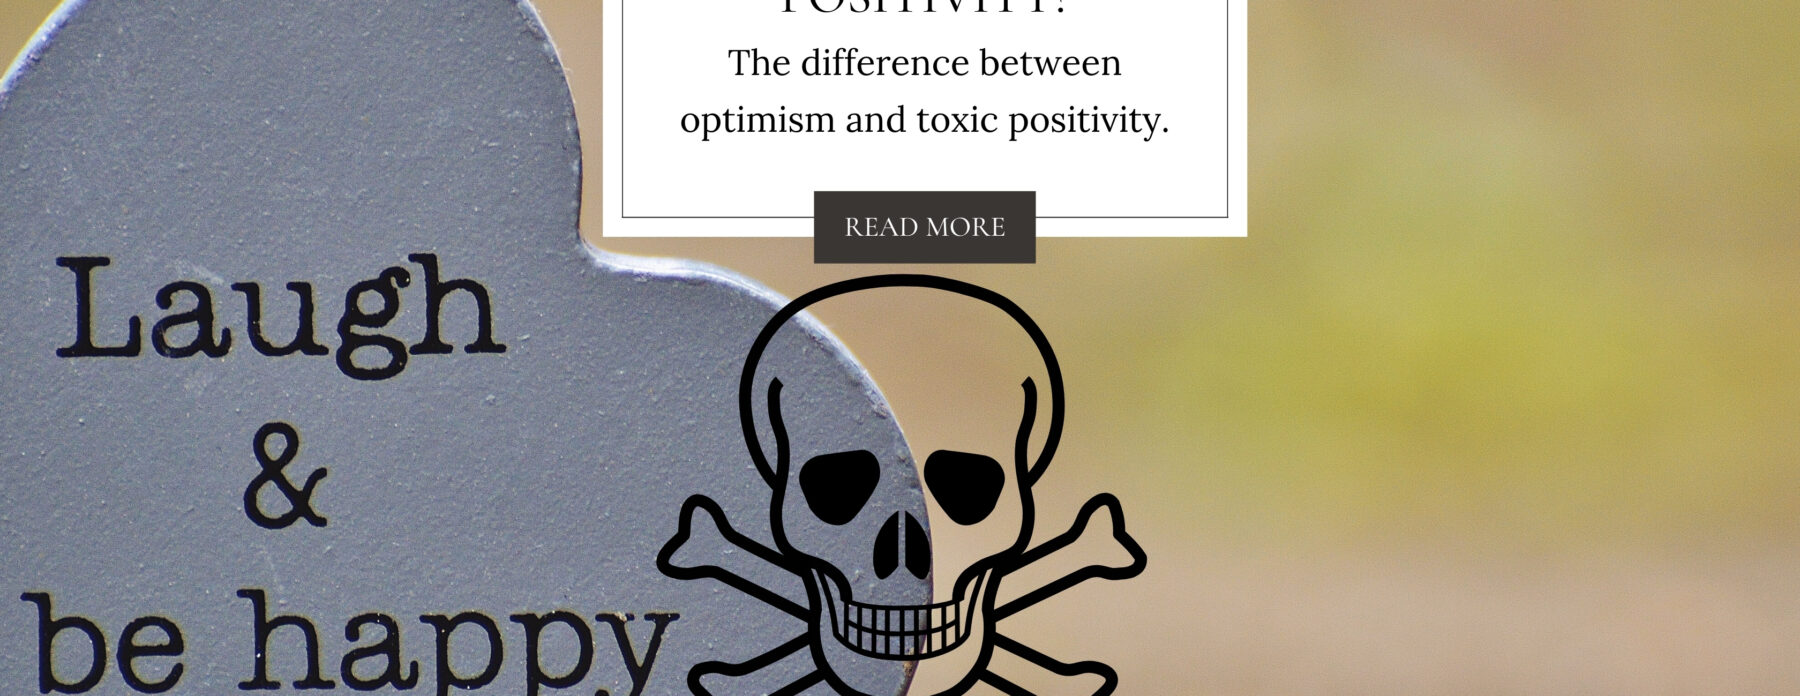 what is toxic positivity